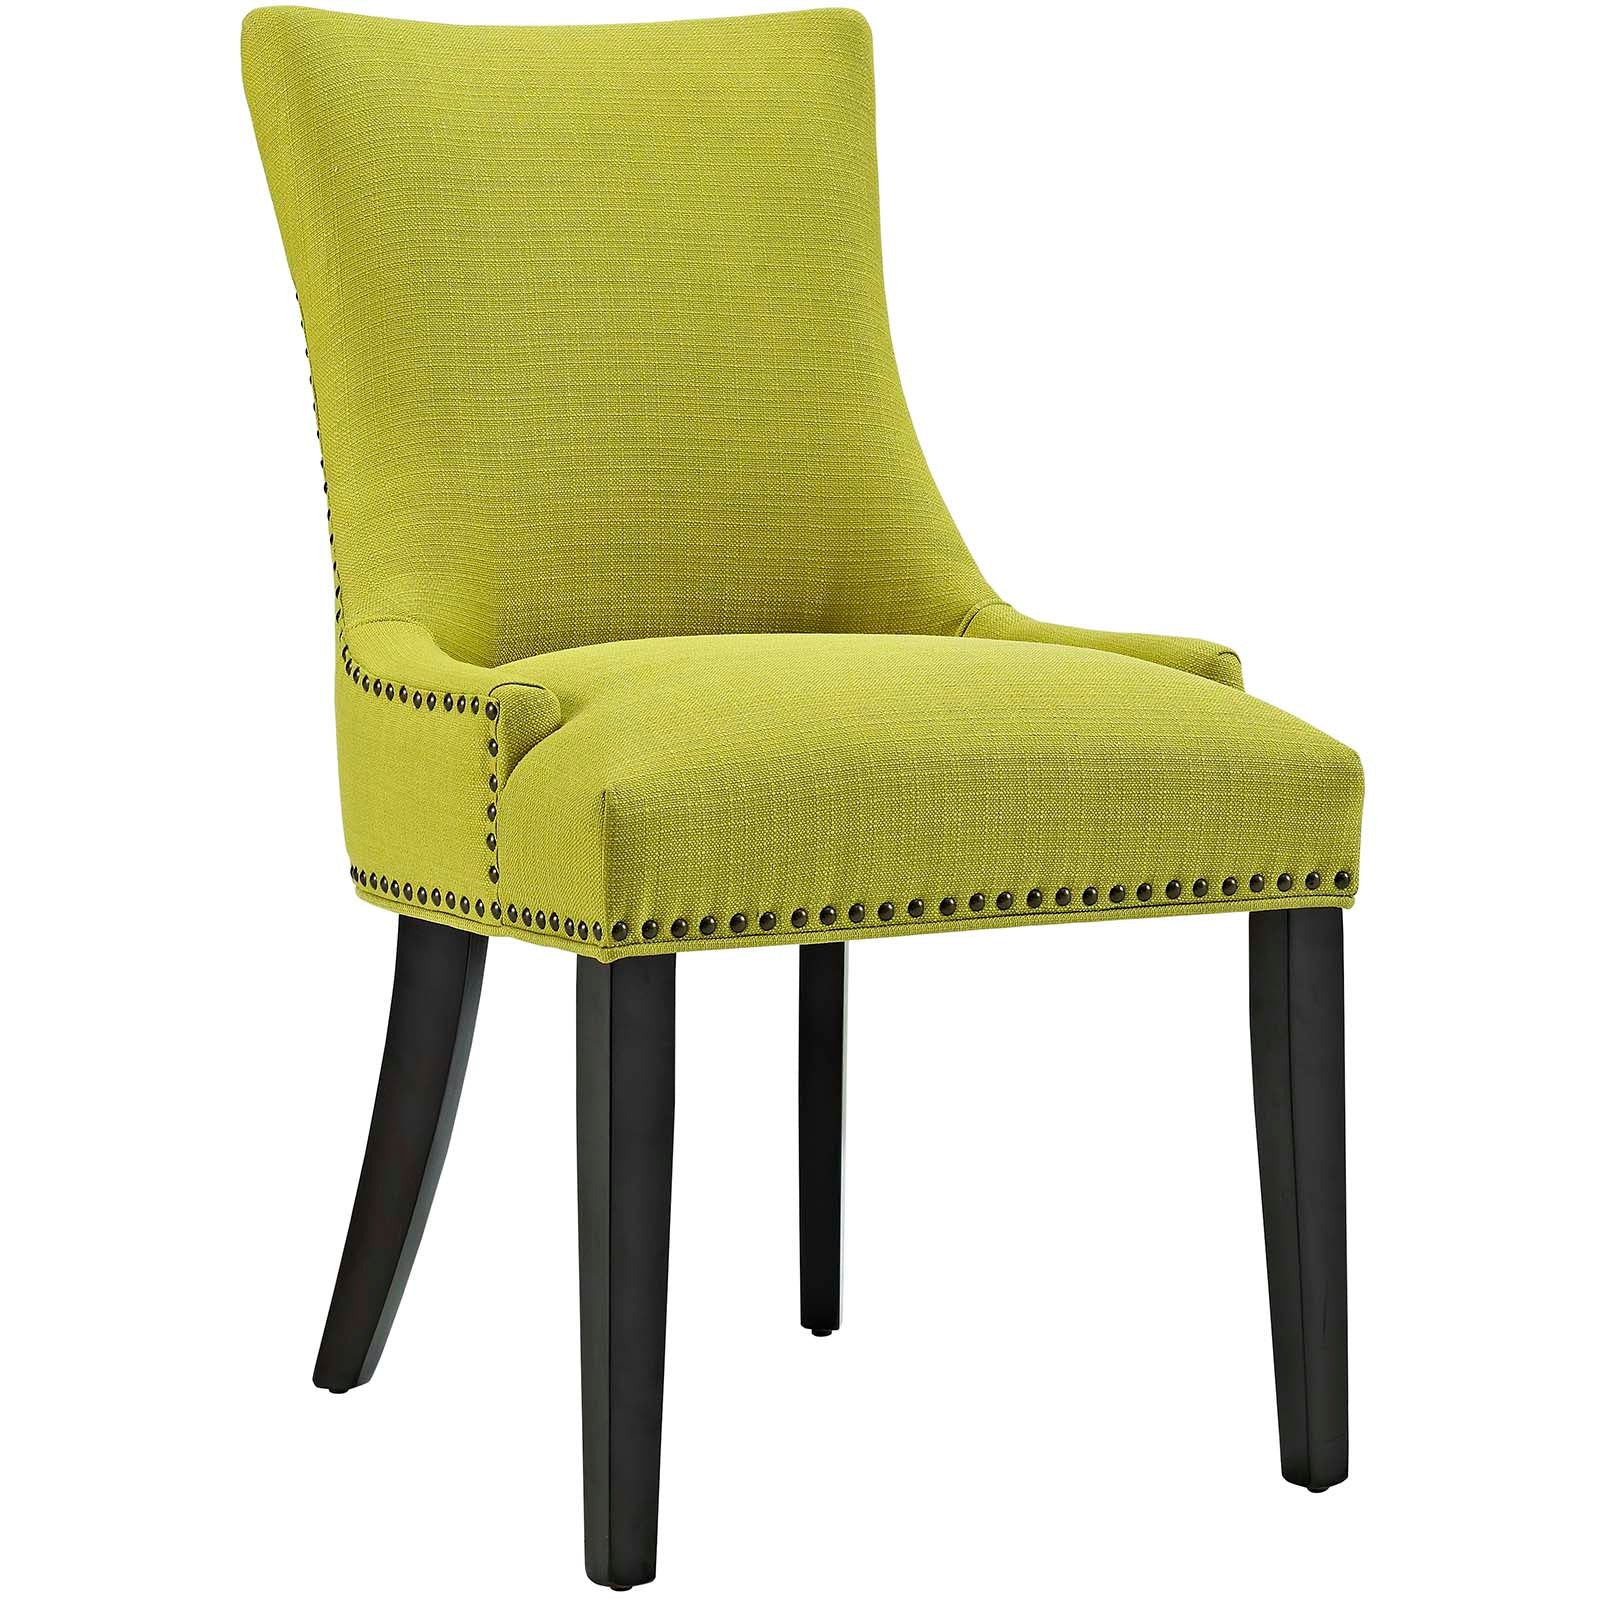 Modway Dining Chairs - Marquis Dining Chair Fabric Wheatgrass (Set of 4)